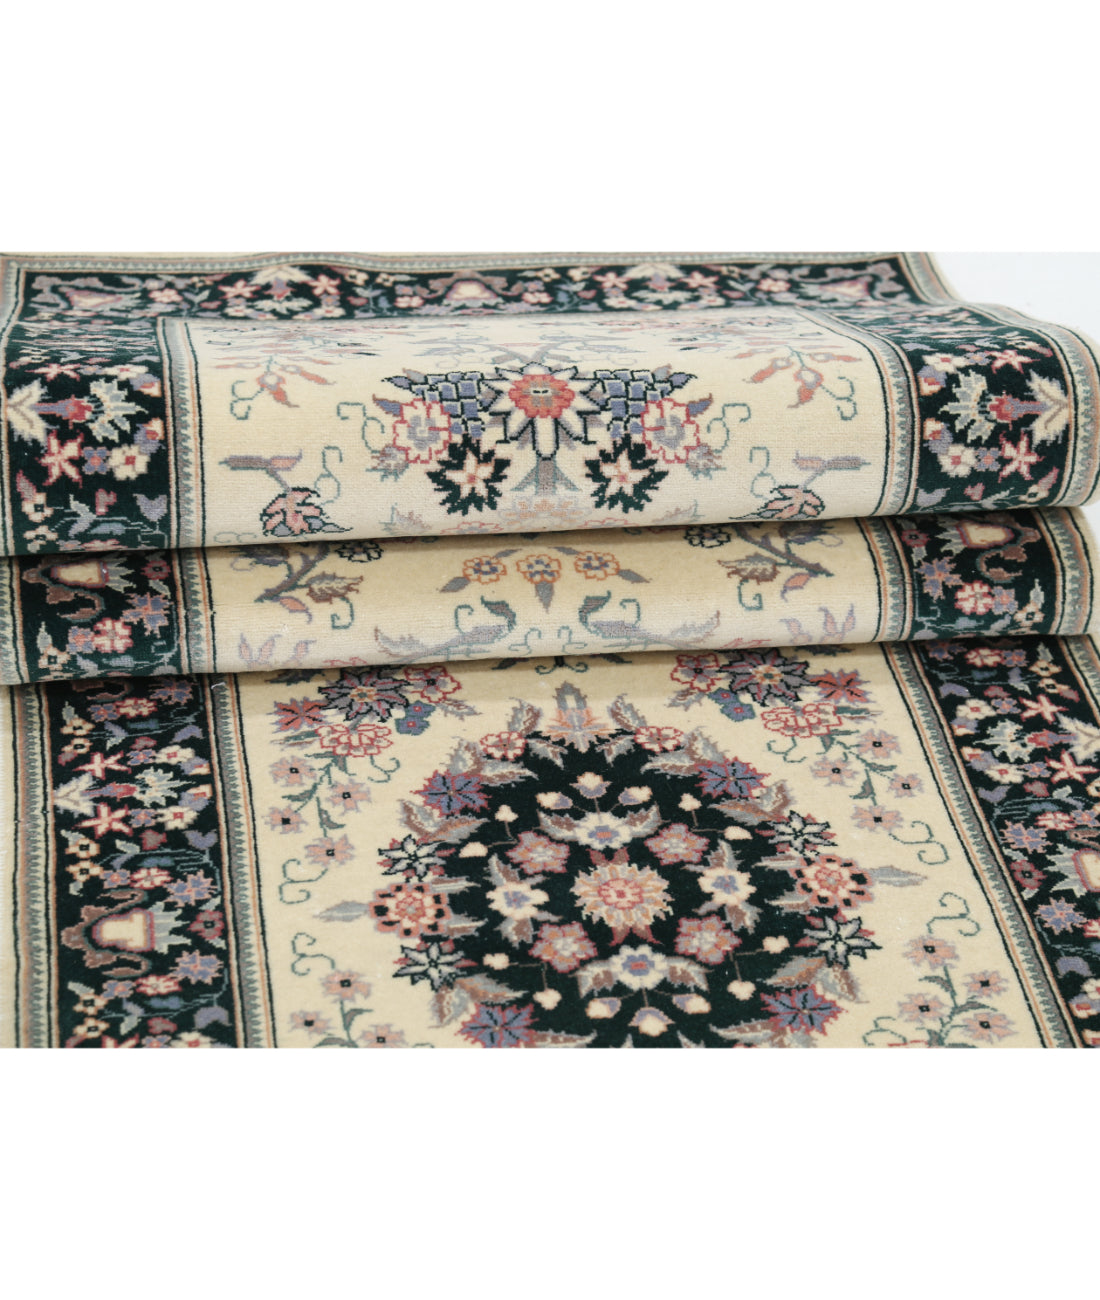 Hand Knotted Heritage Persian Style Wool Rug - 2'6'' x 14'0'' 2' 6" X 14' 0" (76 X 427) / Ivory / Green